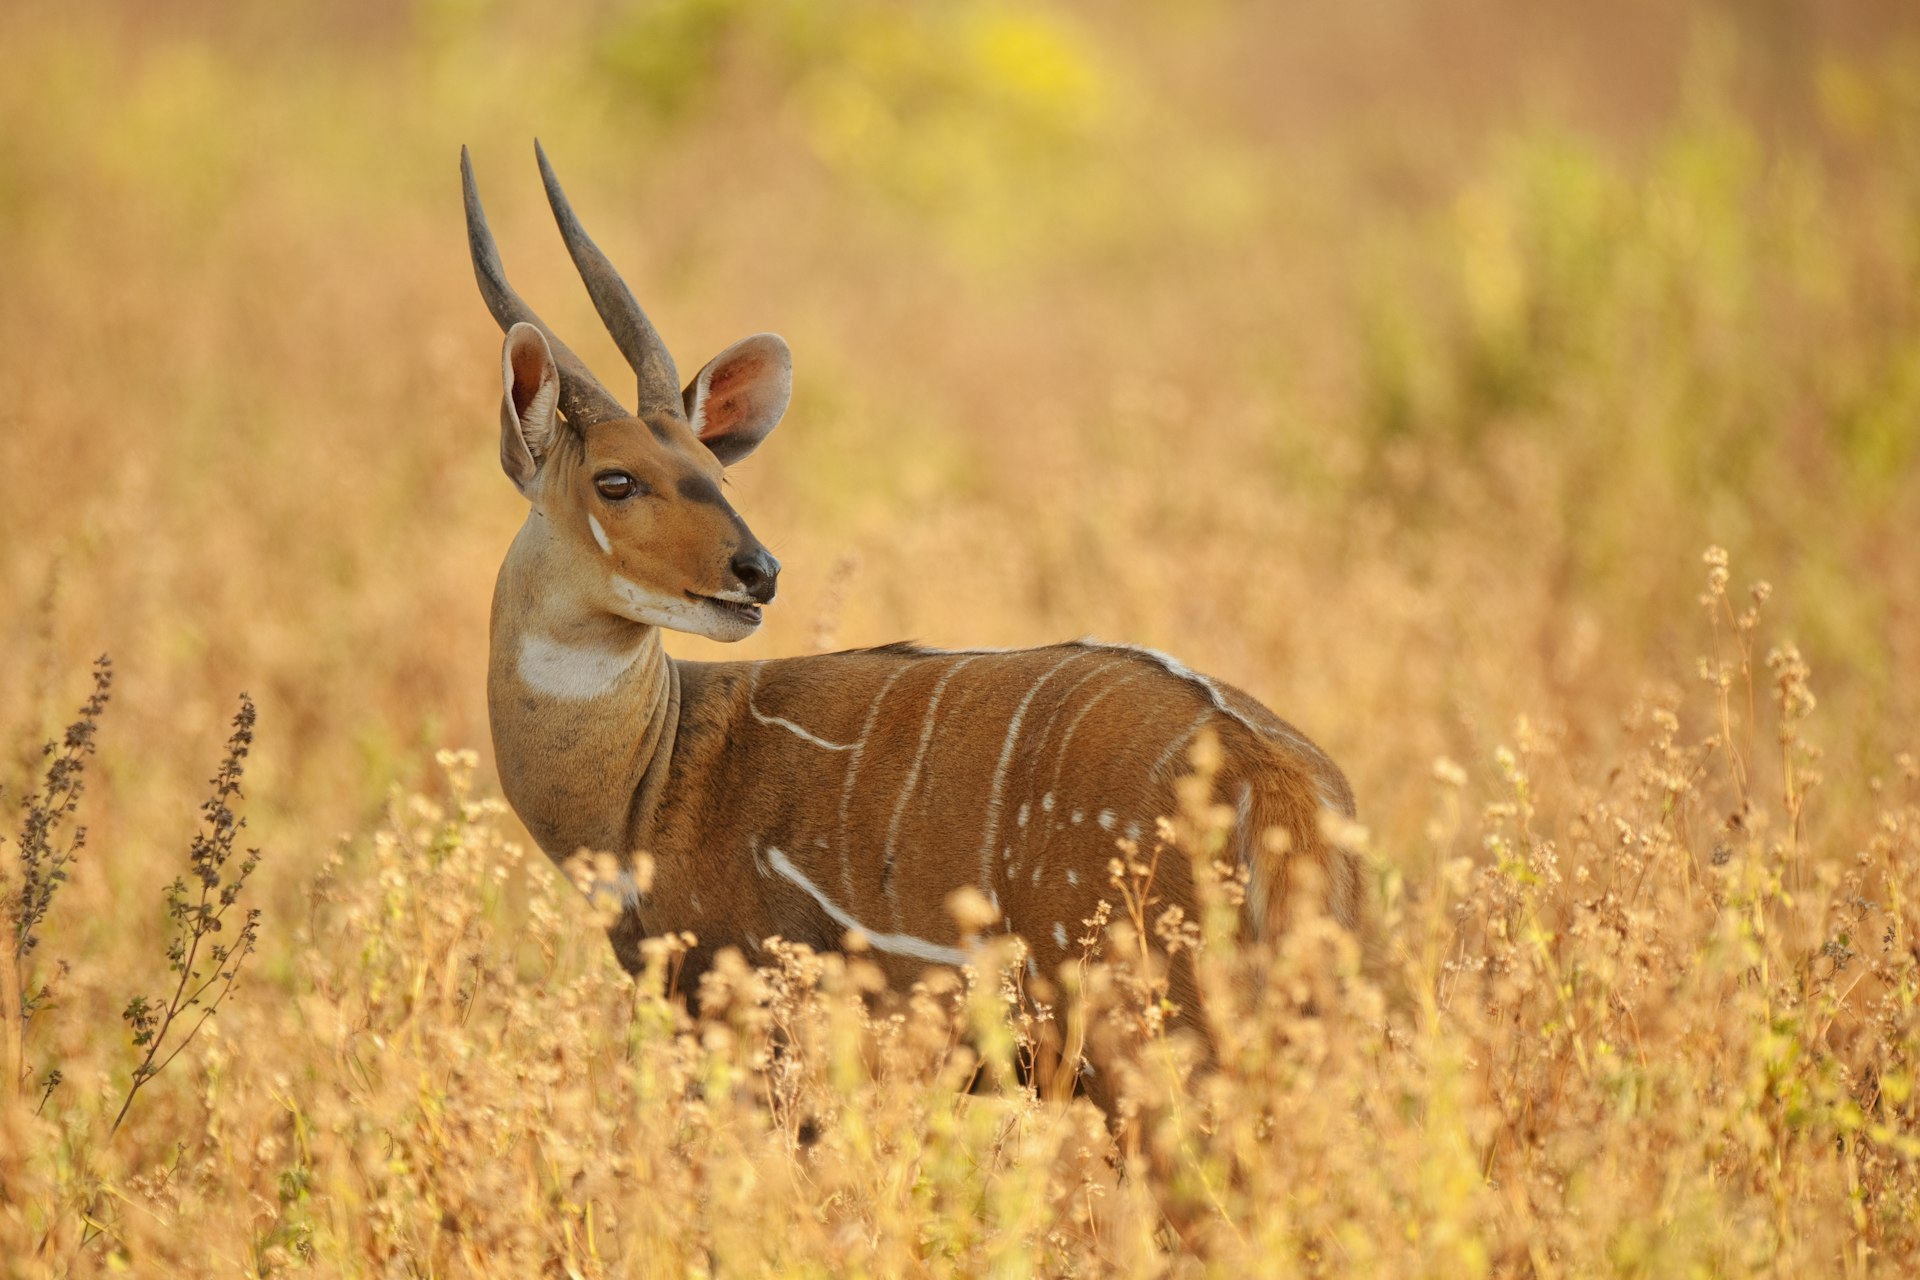 A bushbuck male (Tragelaphus scriptus) in the dry grass in Mole National Park, Ghana